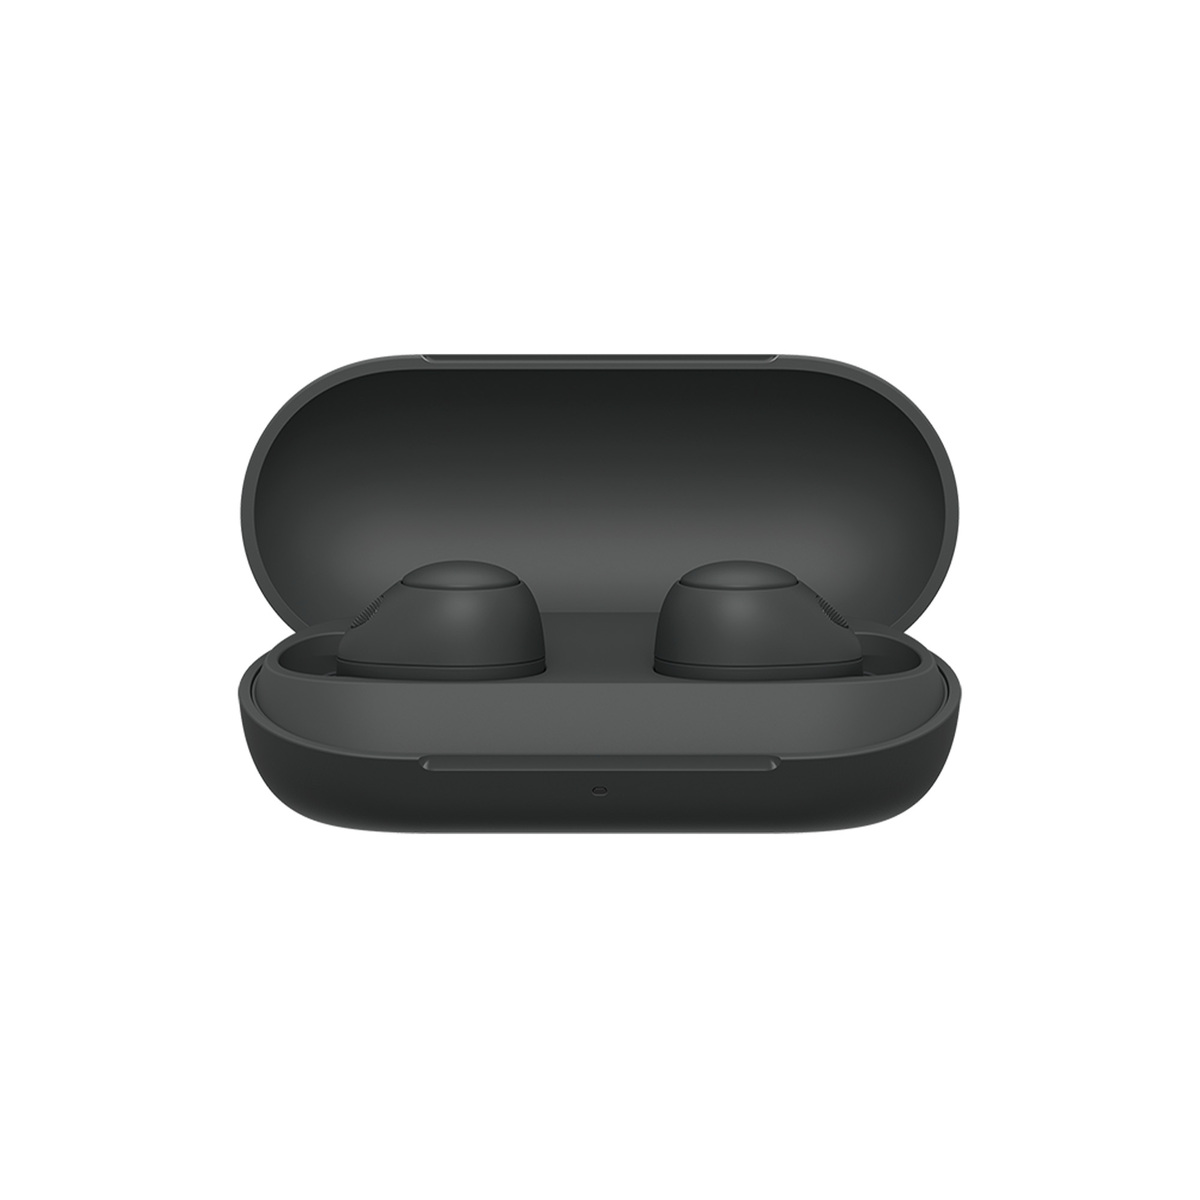 Sony True Wireless Earbuds With Noise Cancellation, Black, WFC700